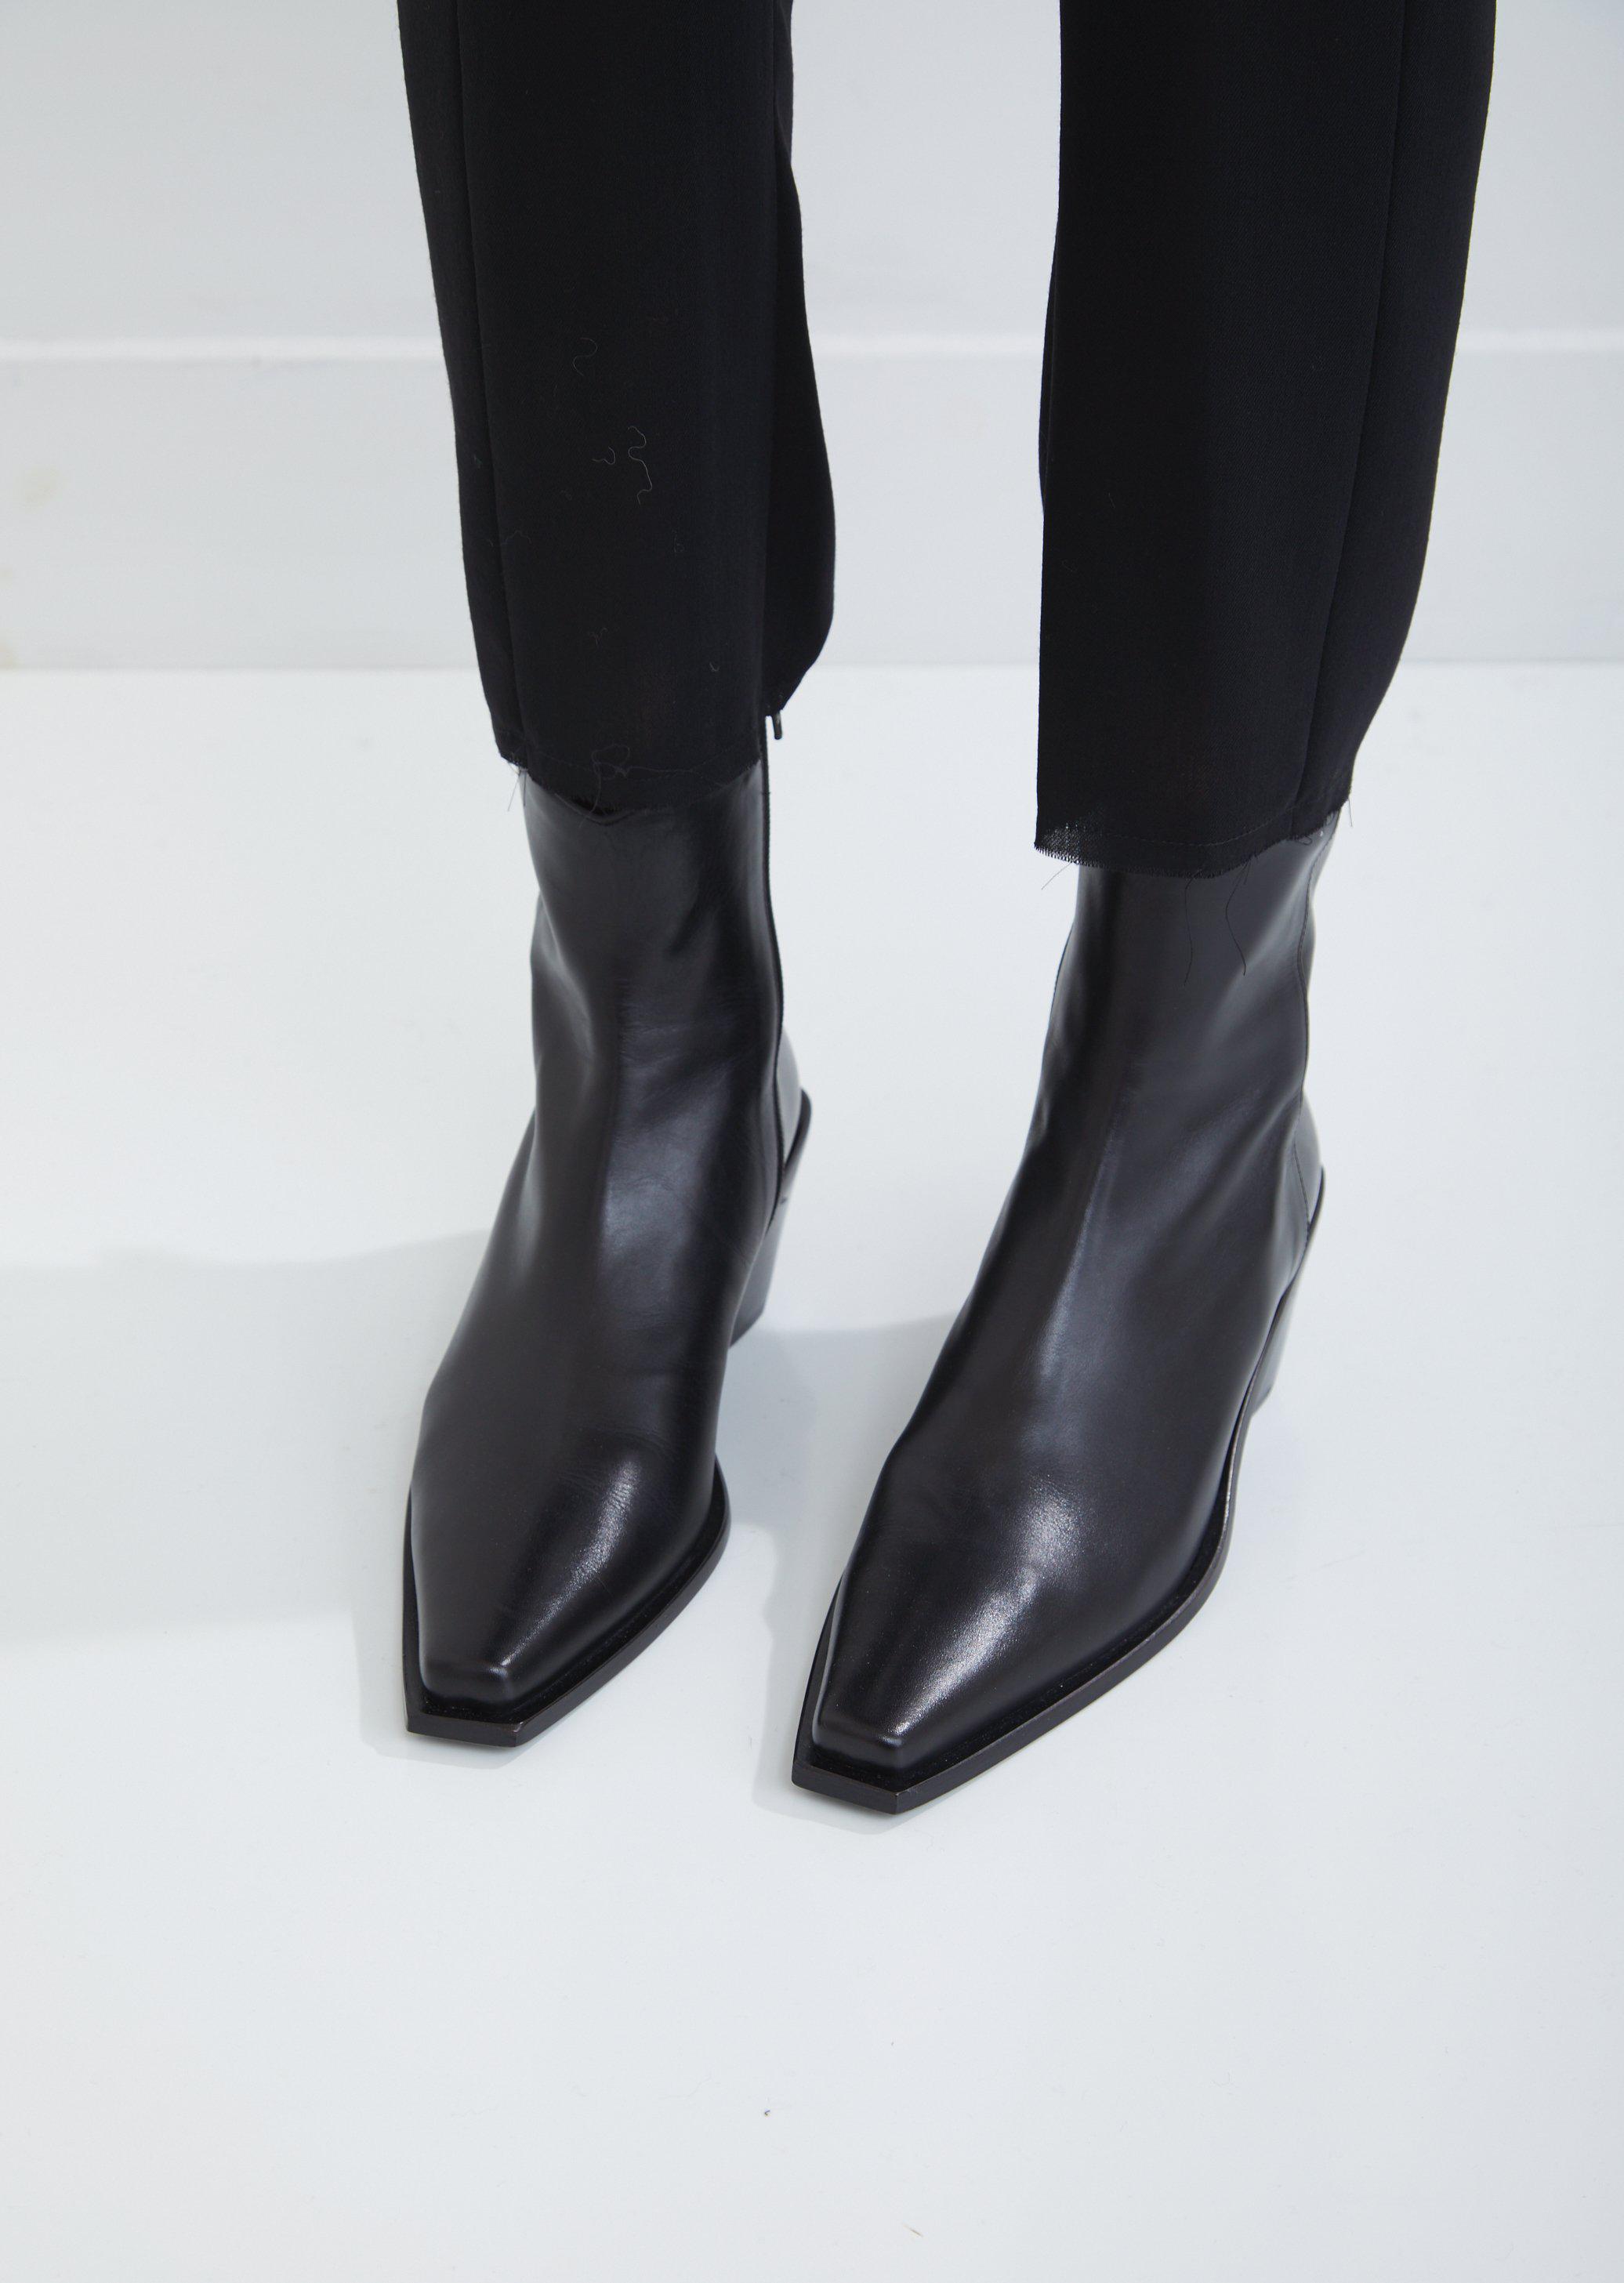 Ann Demeulemeester Leather Heeled Western Ankle Boots in Black - Lyst